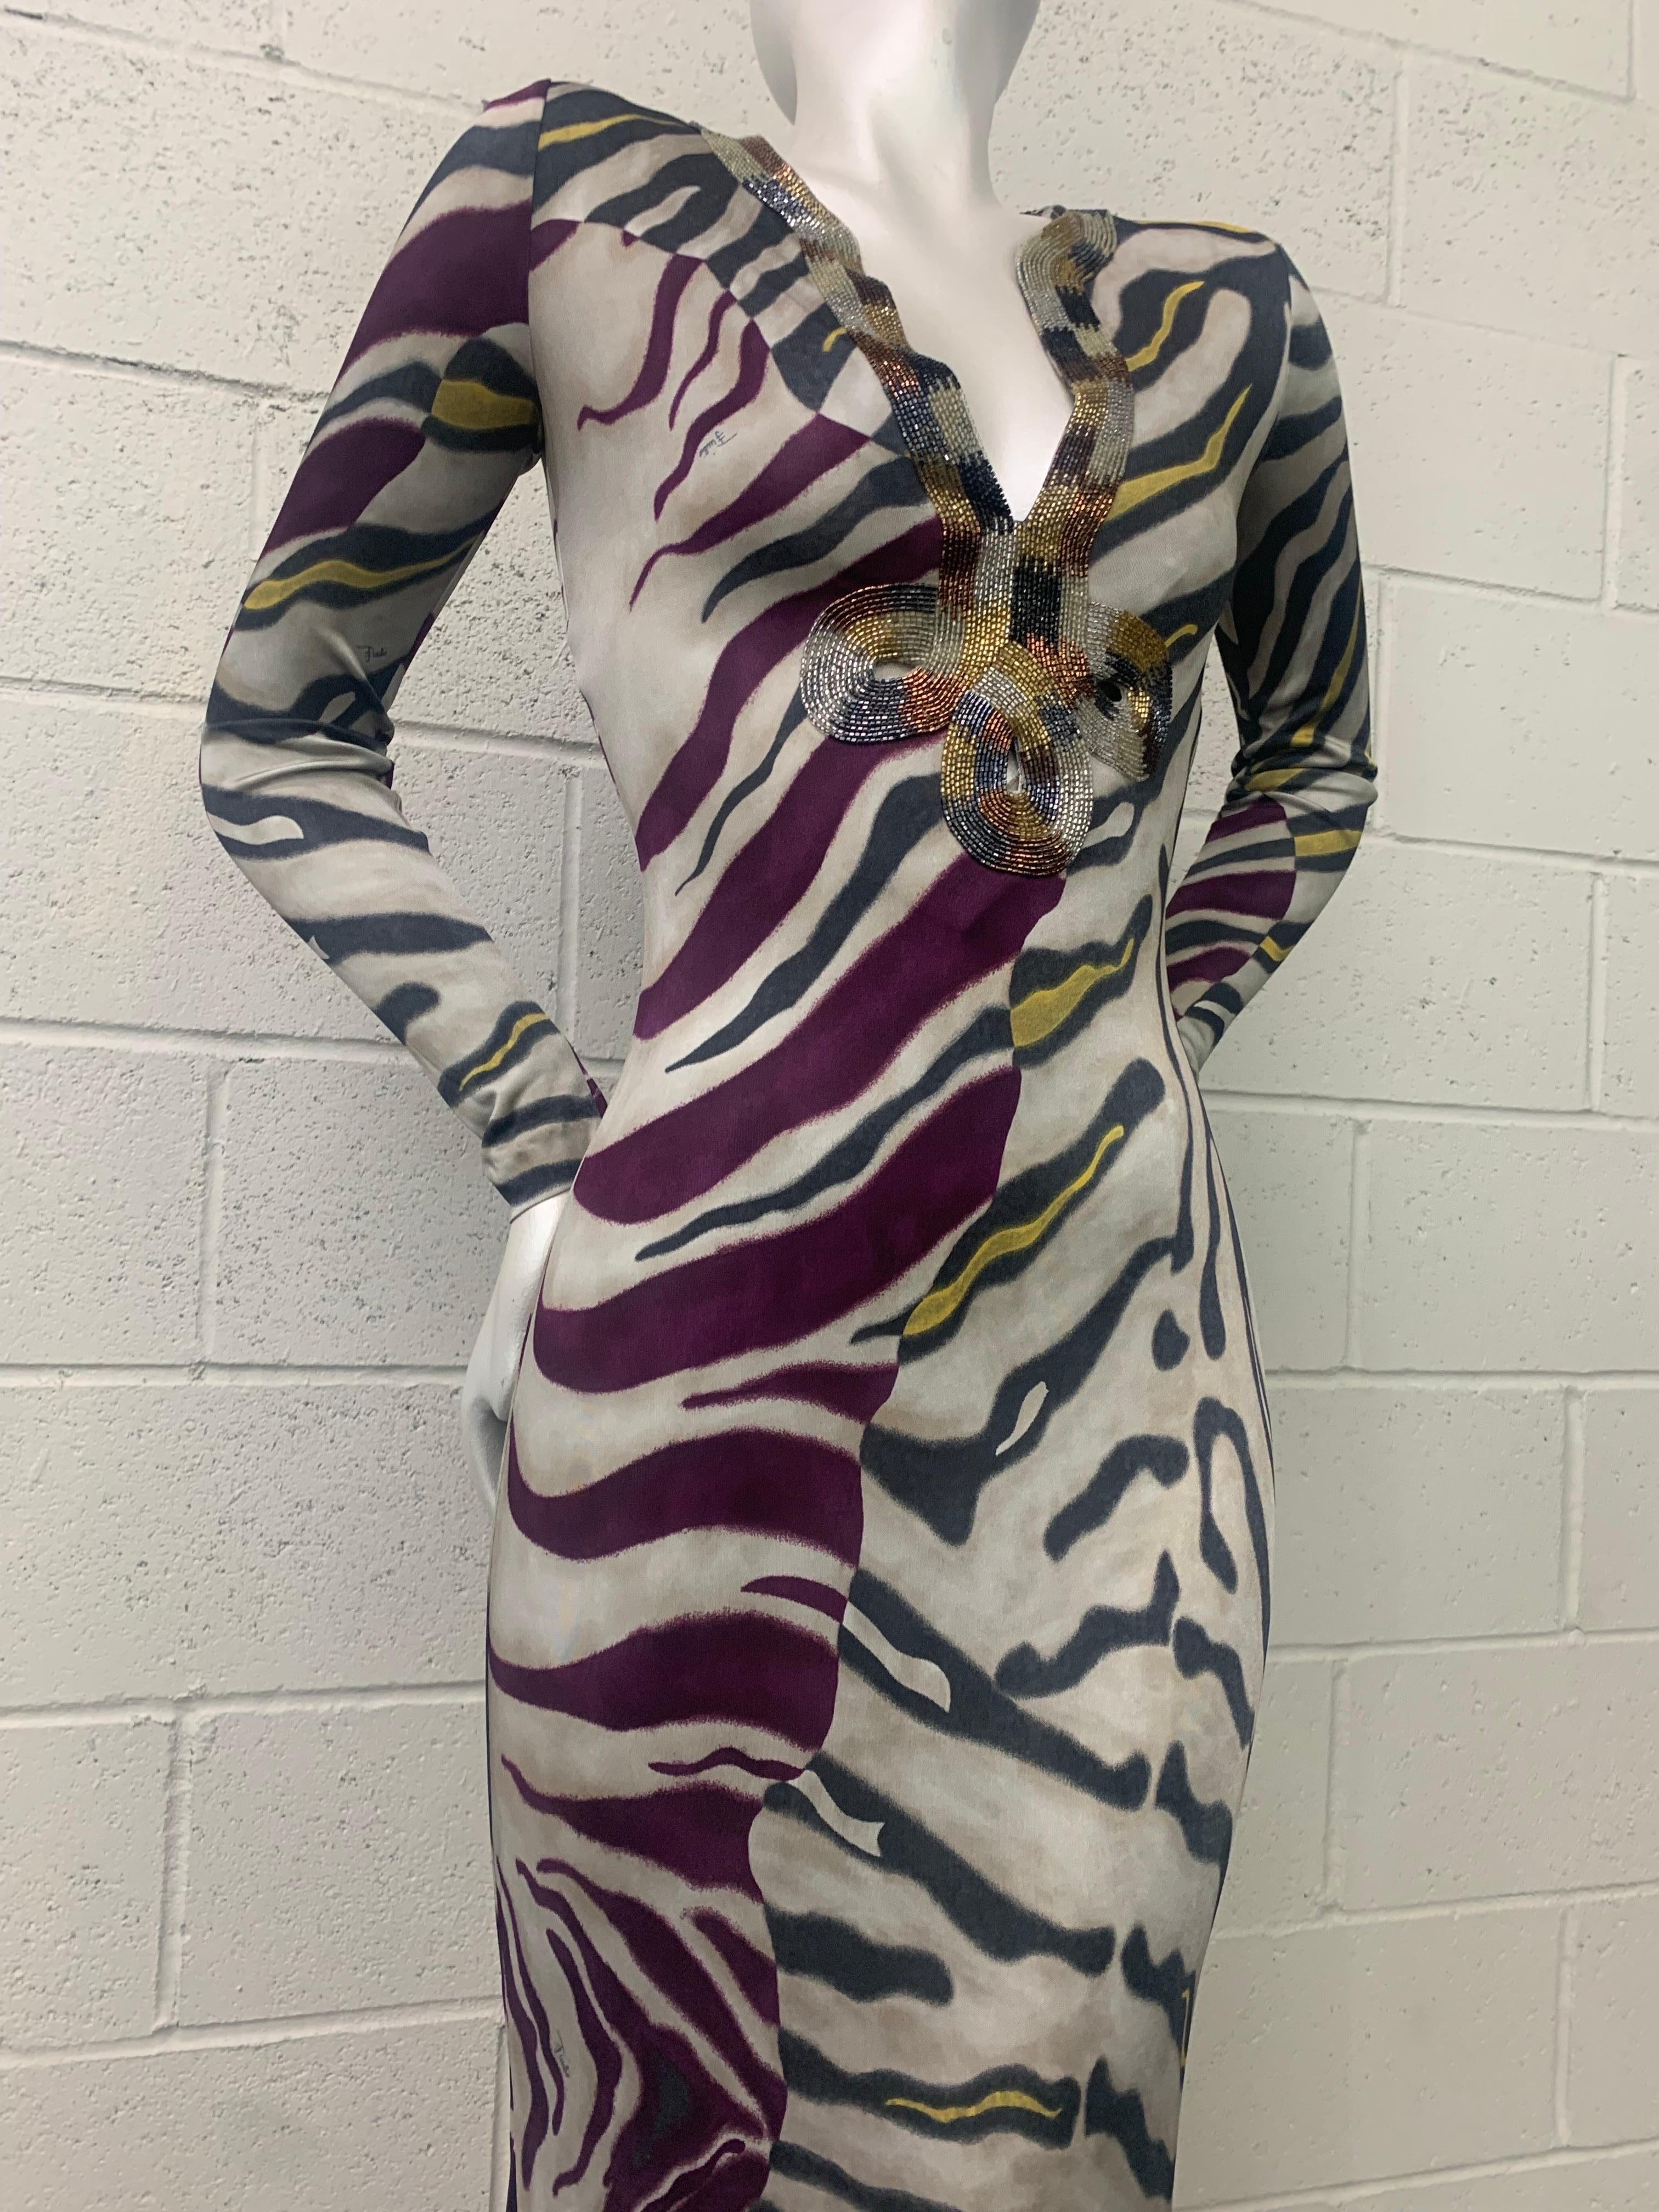 Emilio Pucci Stylized Zebra-Print Body-Conscious Beaded Maxi Dress in Rayon Knit For Sale 3